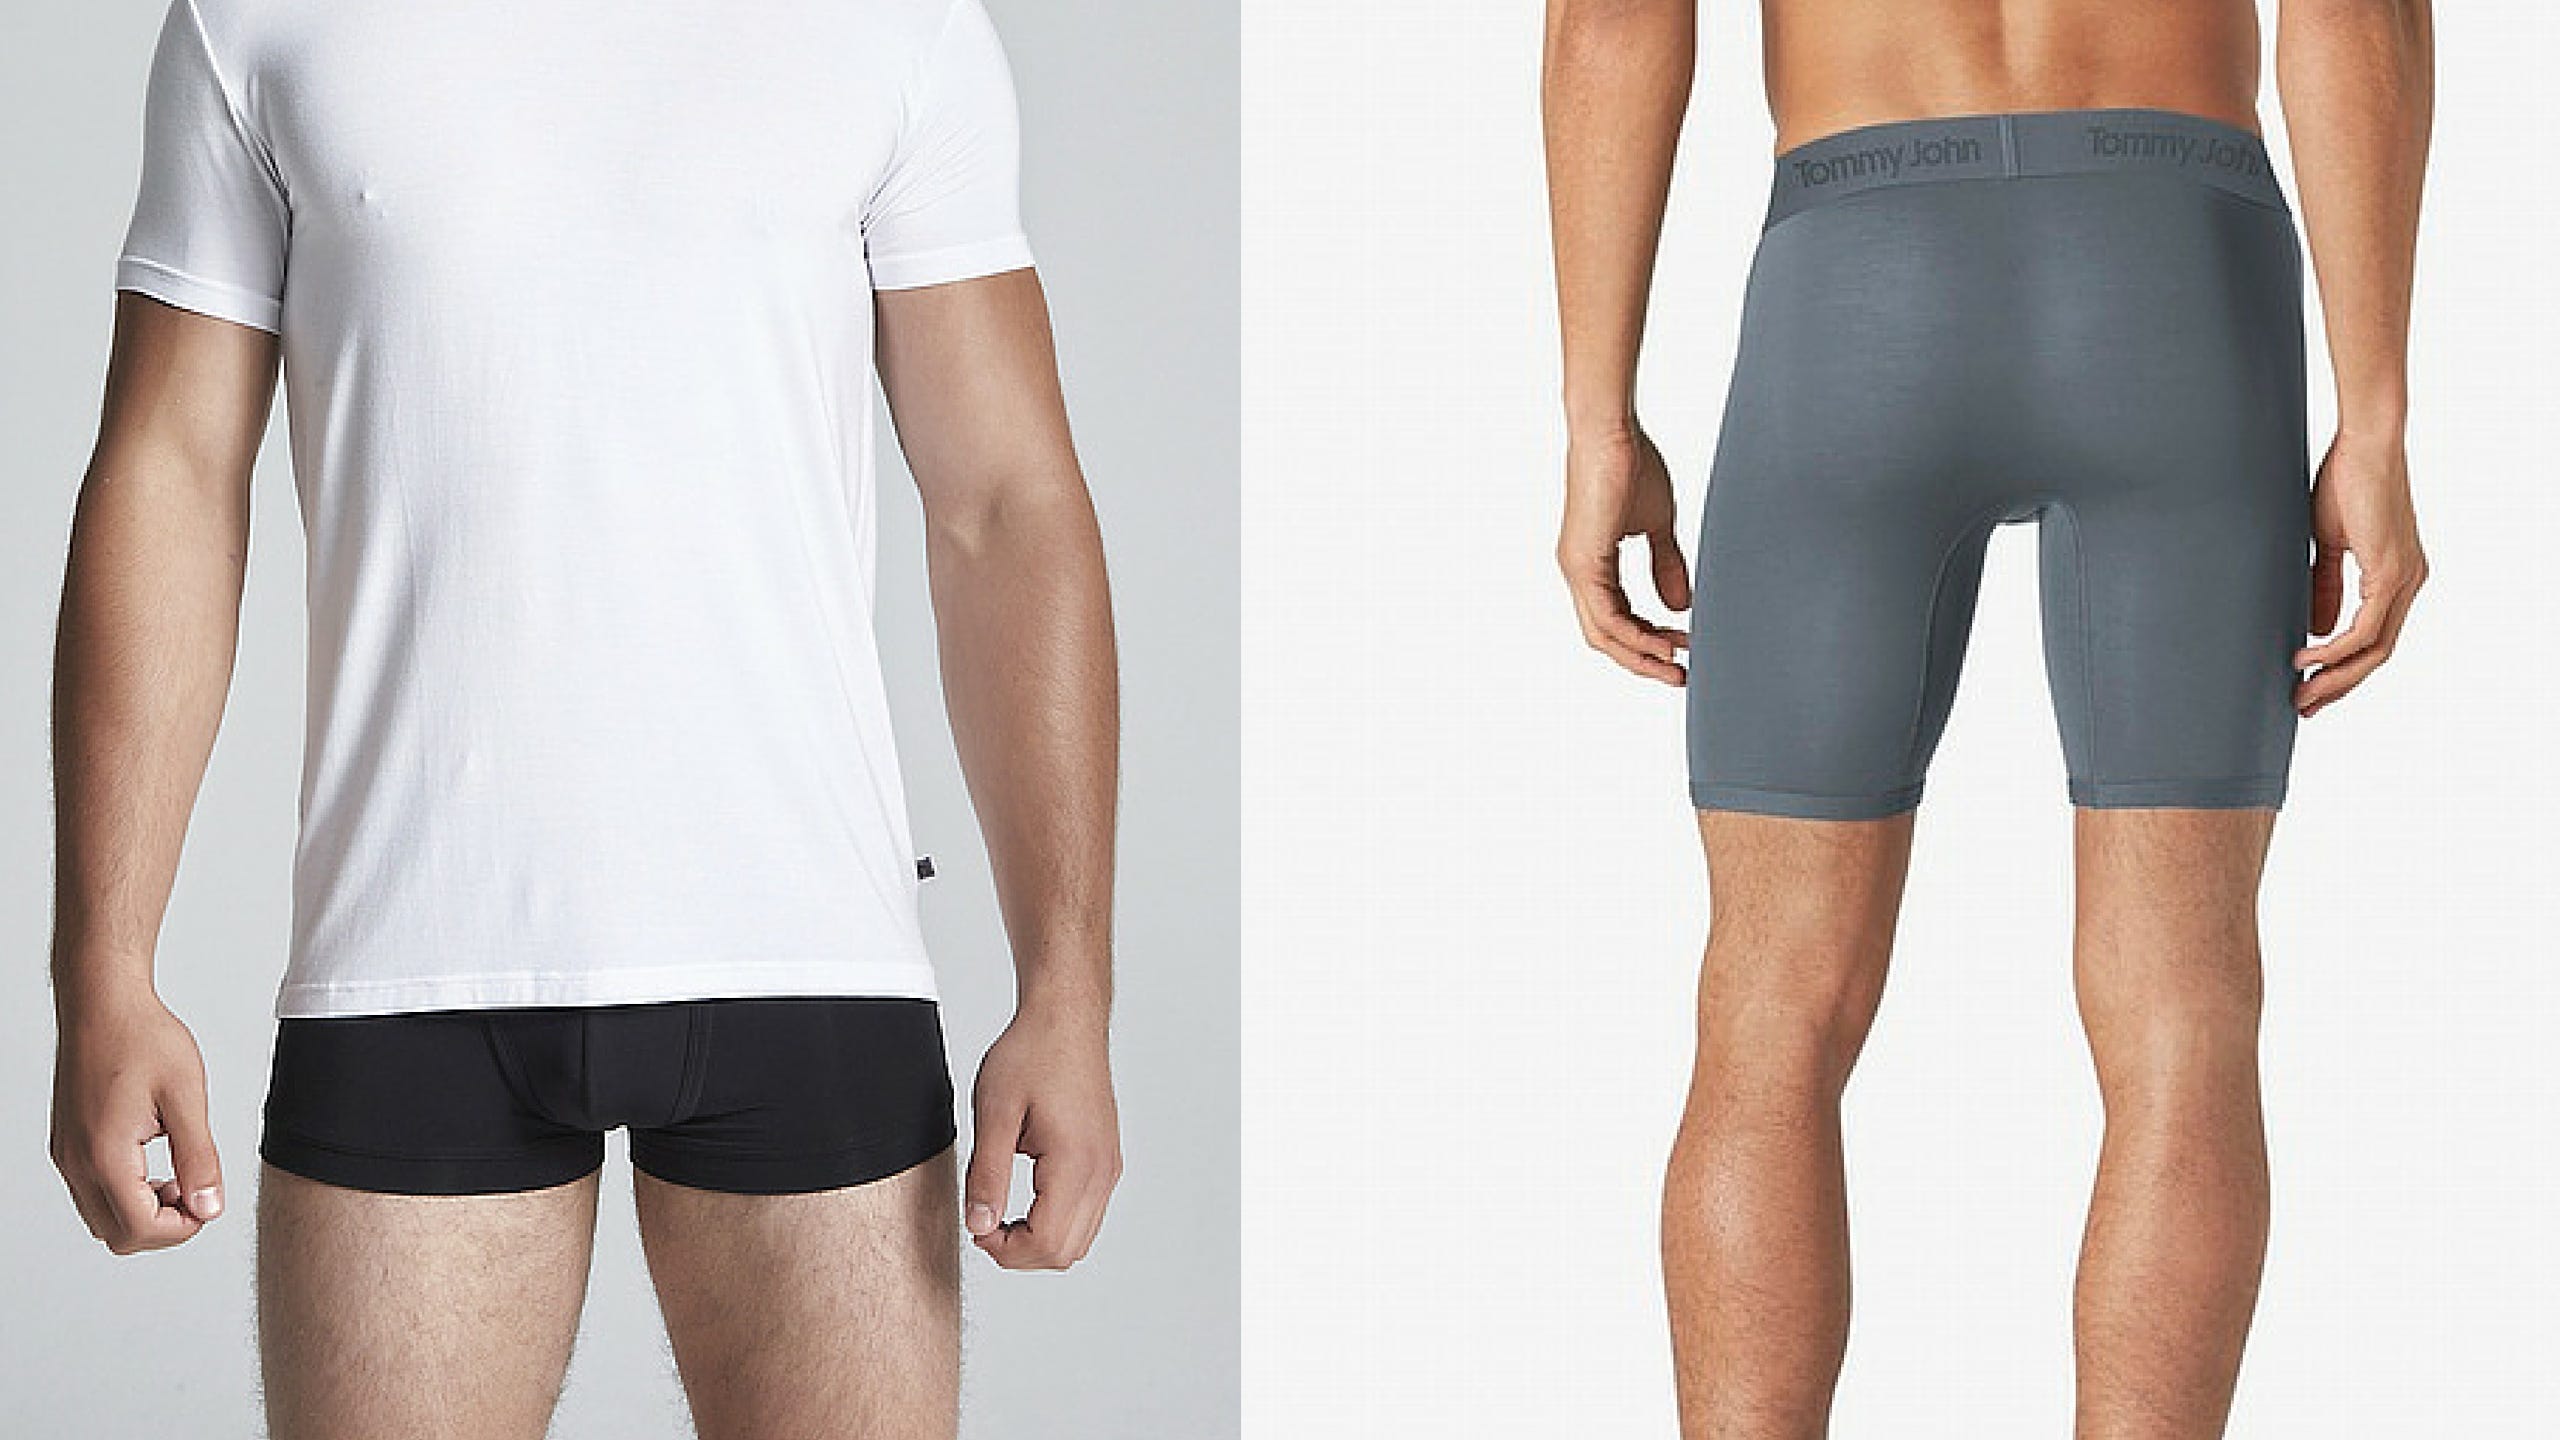 What is the Best Men's Underwear for You?